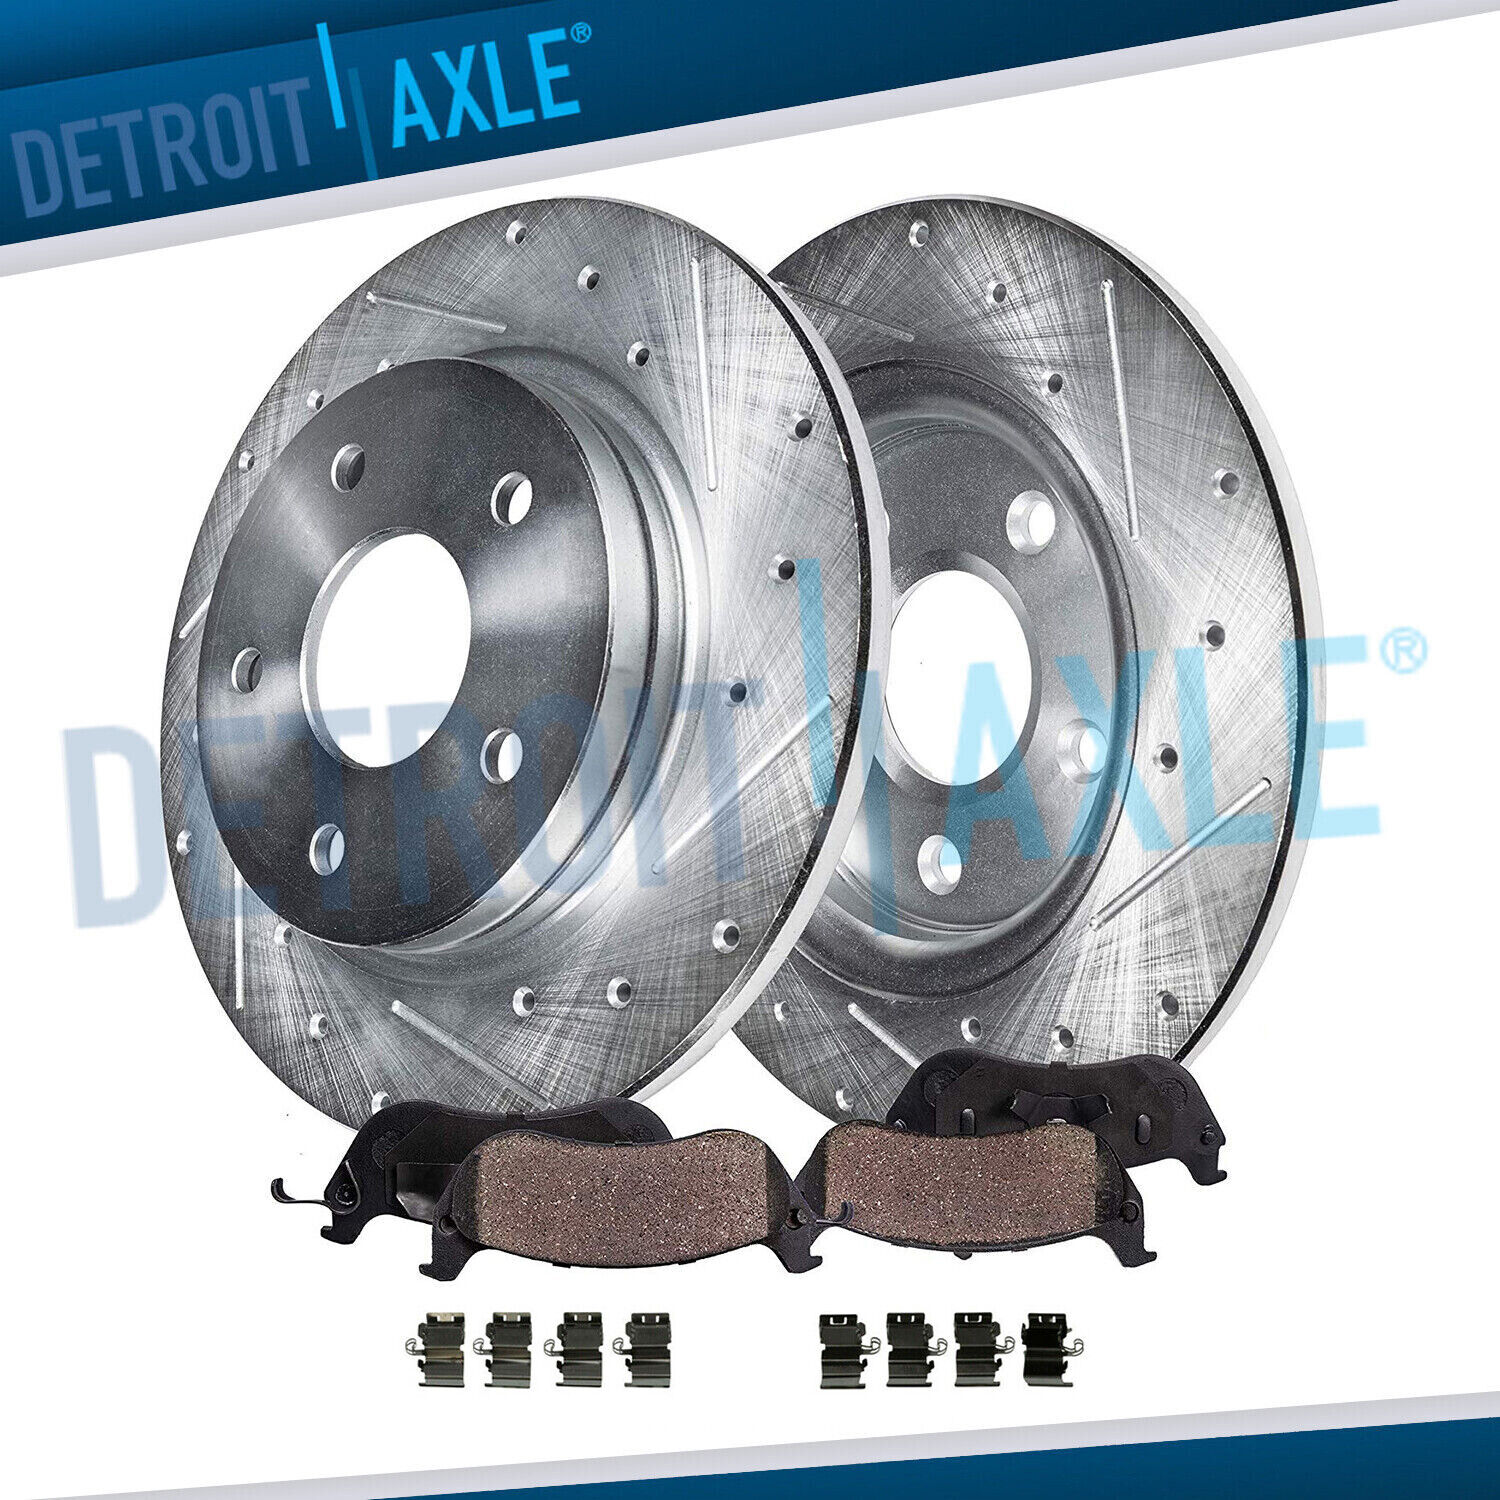 323mm Rear Brakes Rotors Brake Pads for Grand Caravan Journey Town and Country